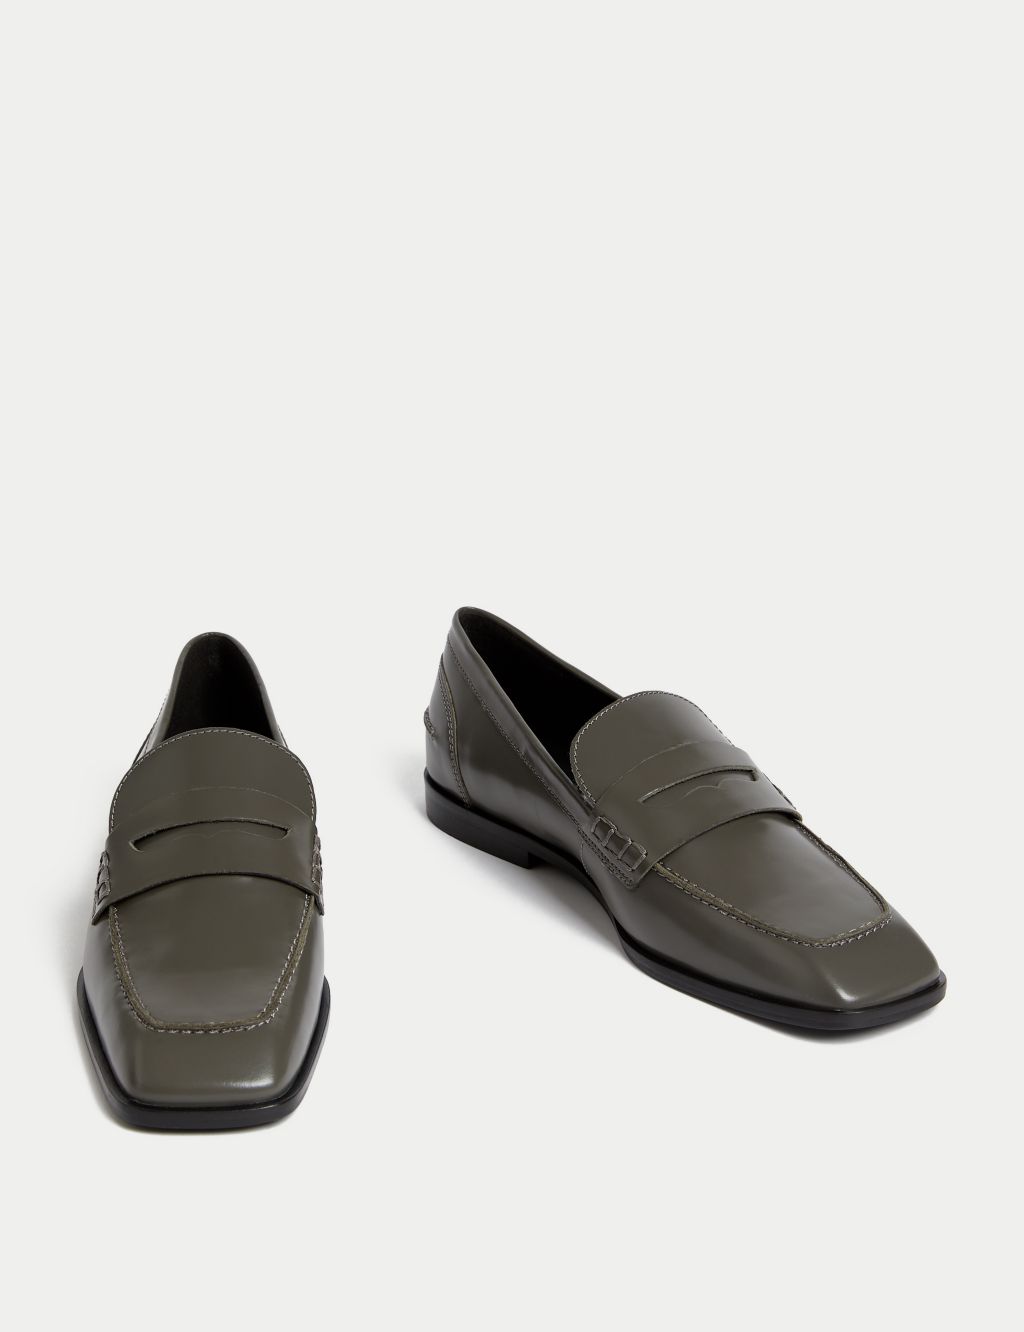 Leather Flat Square Toe Loafers image 2